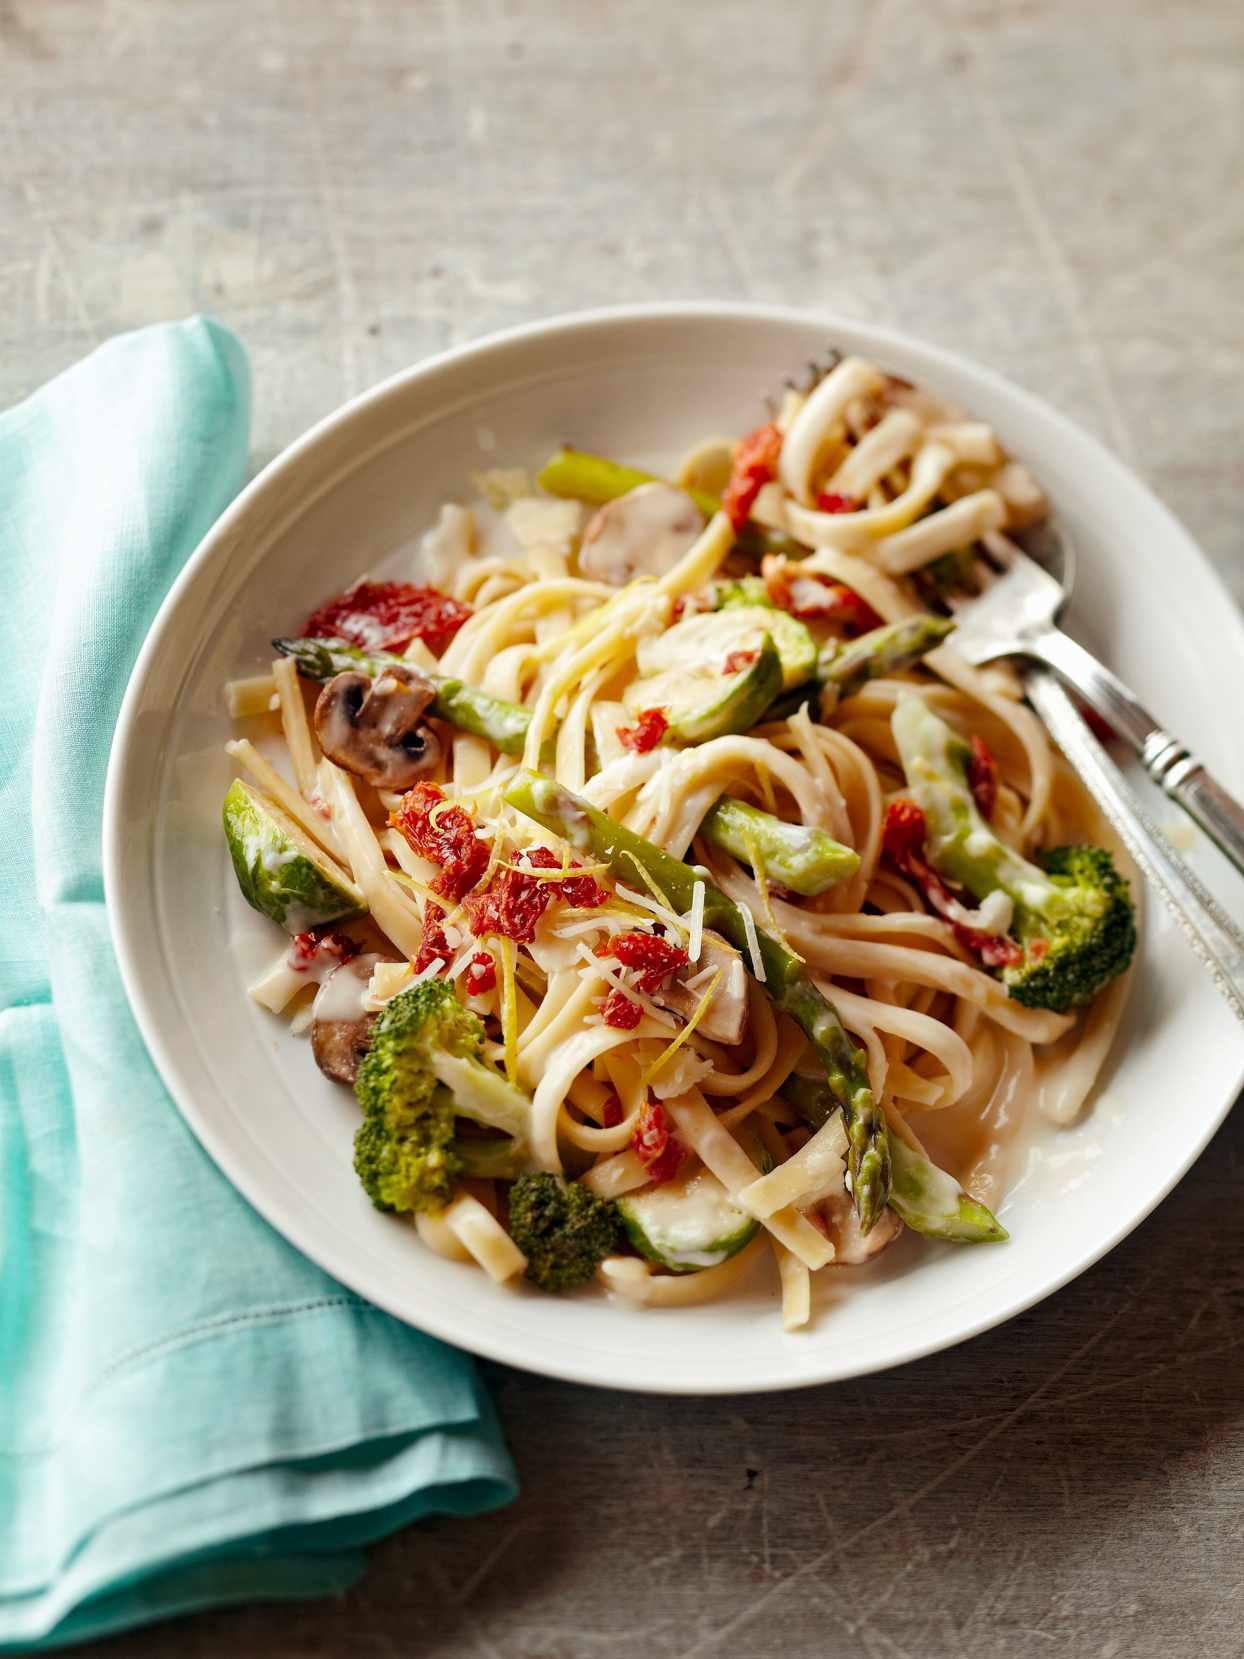 Fettuccine Alfredo with Sun-Dried Tomatoes and Veggies | Better Homes ...